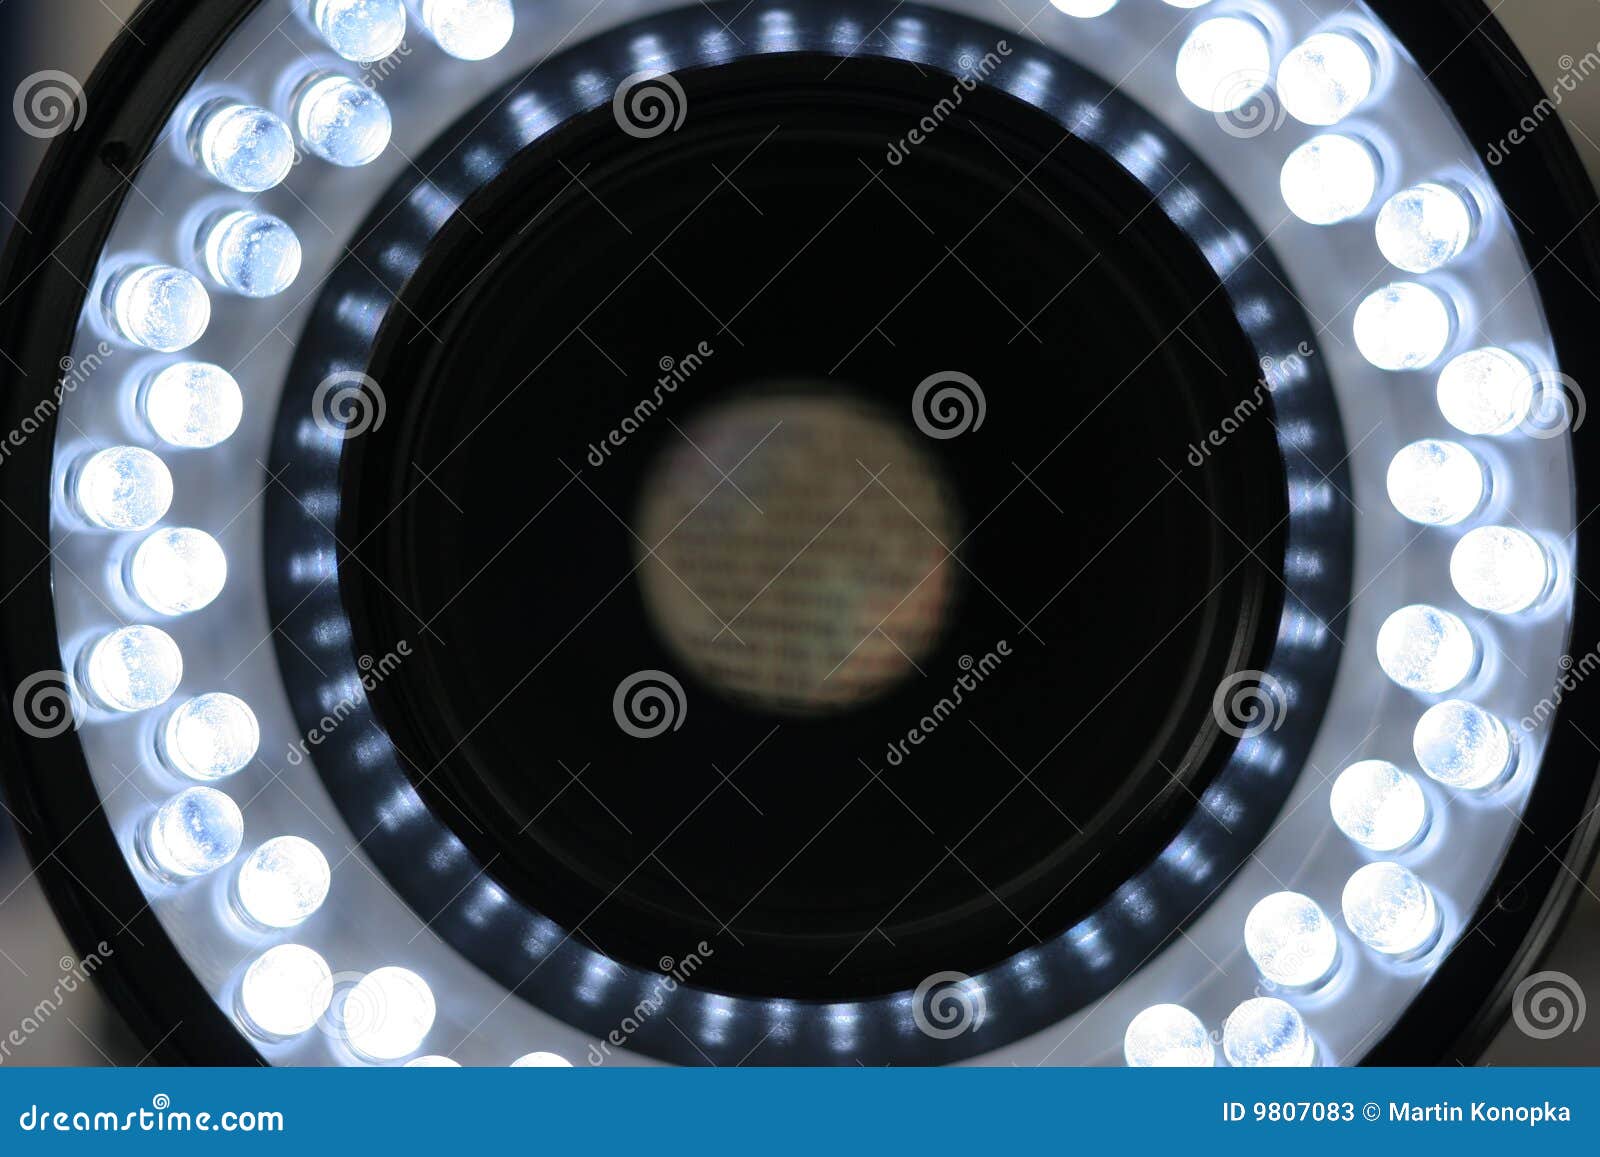 Blue Lit Glowing Neon Glowing Led Ring On Dark Black Background, 3d Render  Of Blue Podium With Light Circle, Hd Photography Photo, Podium Background  Image And Wallpaper for Free Download